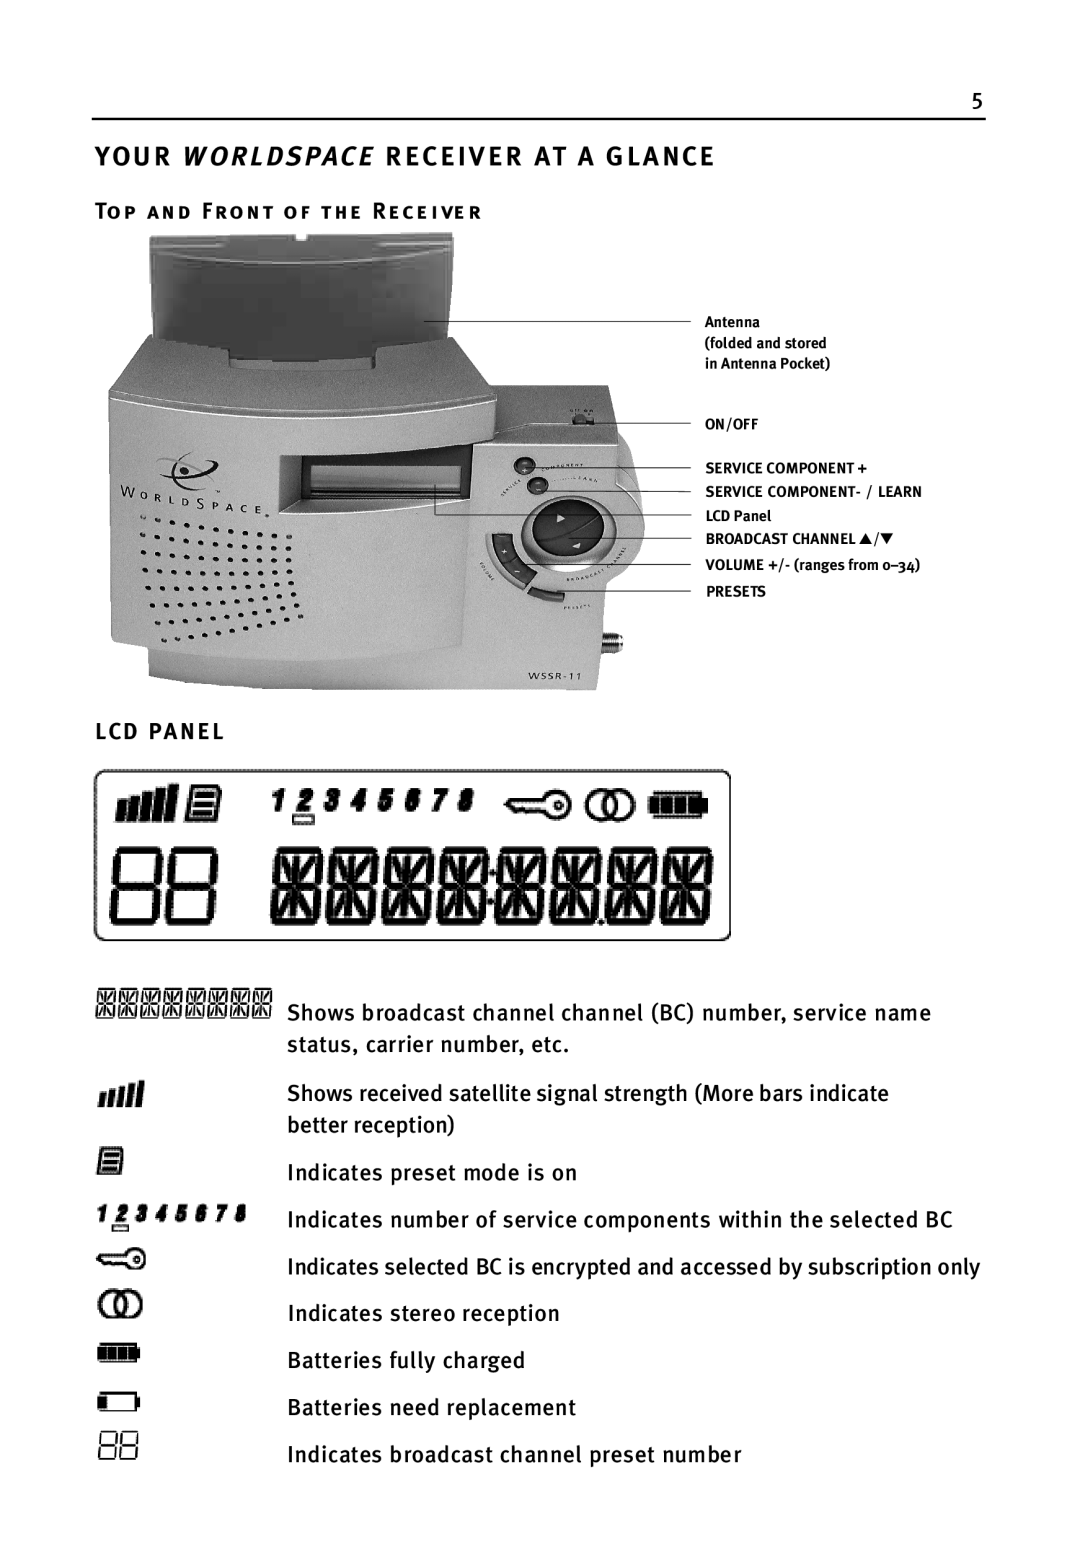 WorldSpace wssr-11 manual Your W O R L D S Pac E Receiver At A Glance, Top and Front of the Rec e i ve r, L Cd Pa N E L 